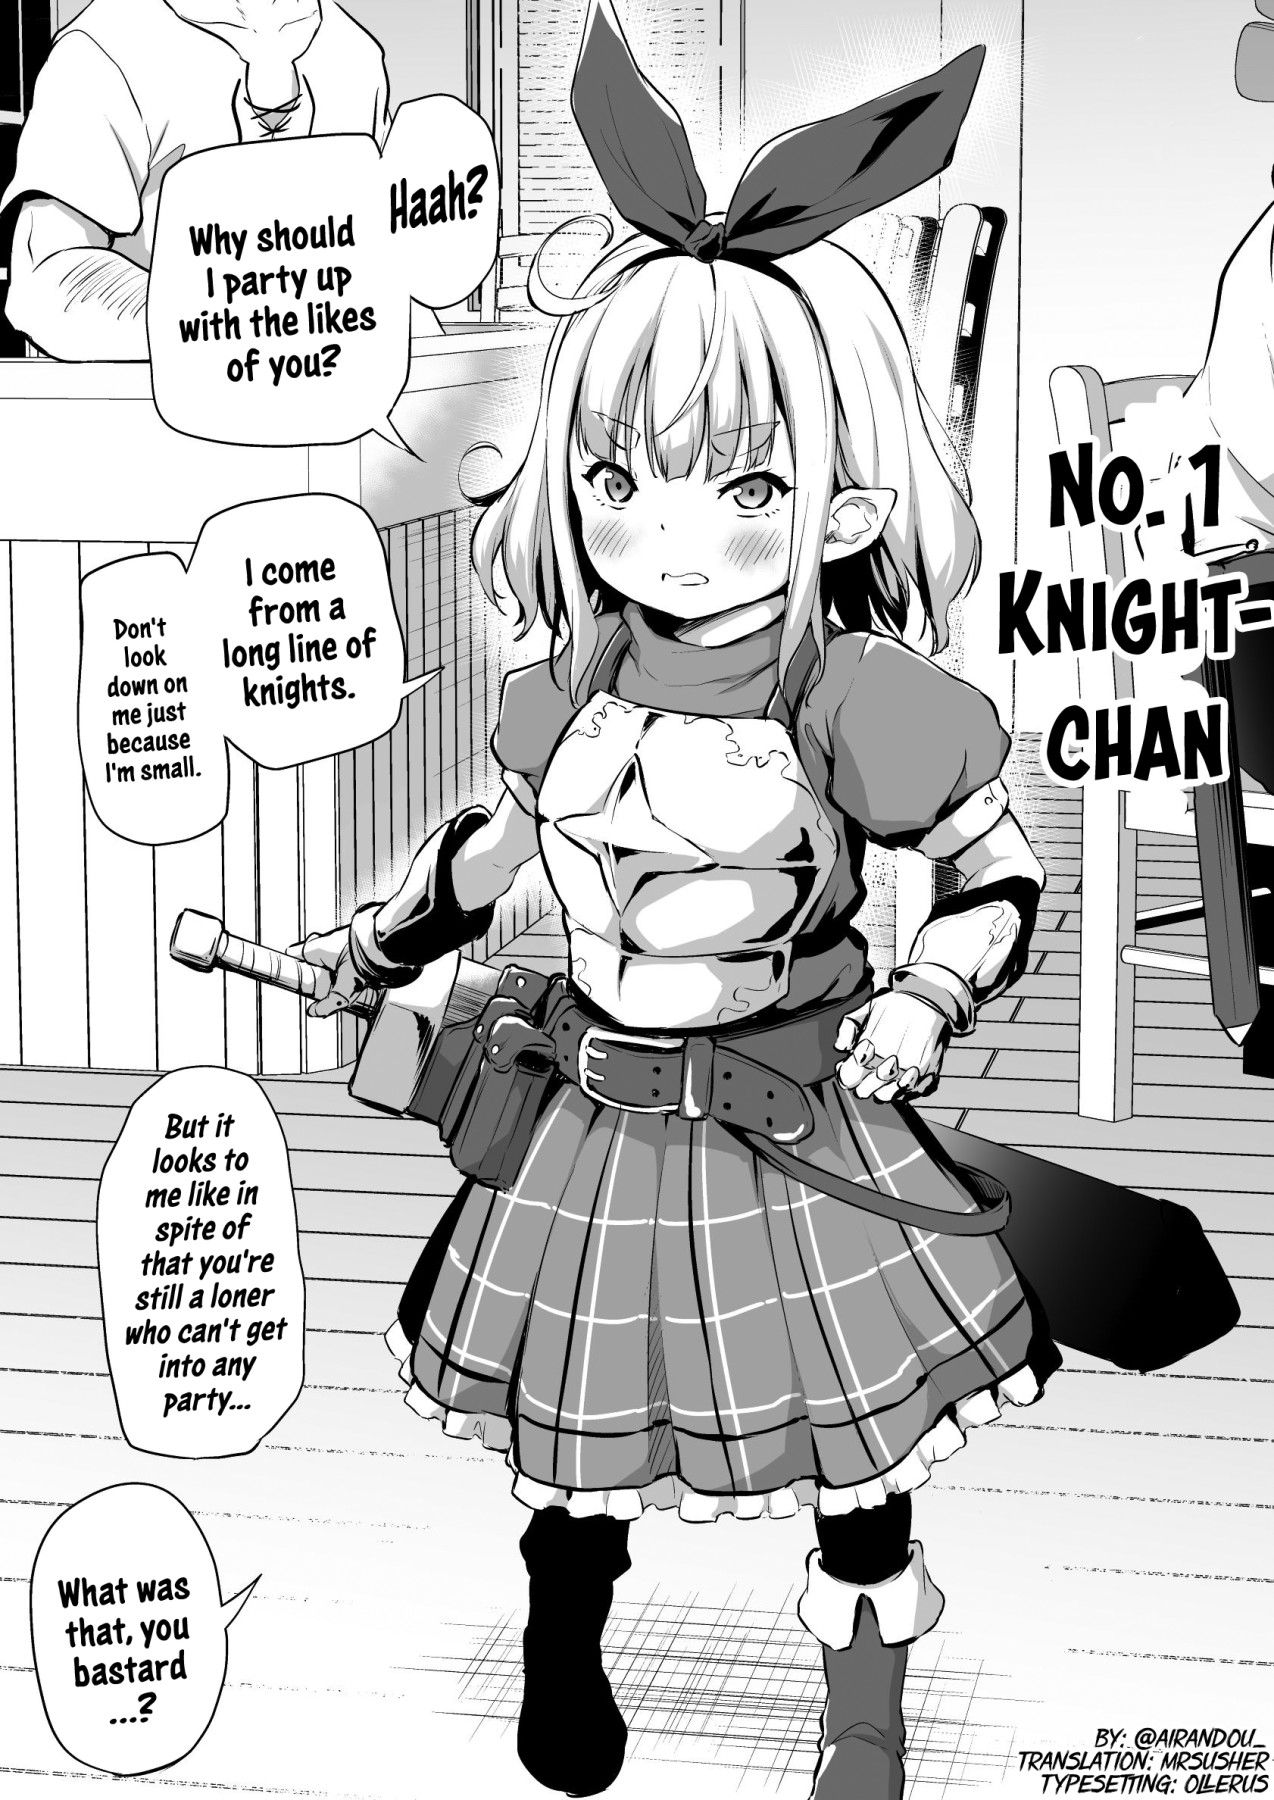 Hentai Manga Comic-Since I Got Reborn Into Another World I Might As Well Try Gathering a-Chapter y of Loli Races 1~4-1